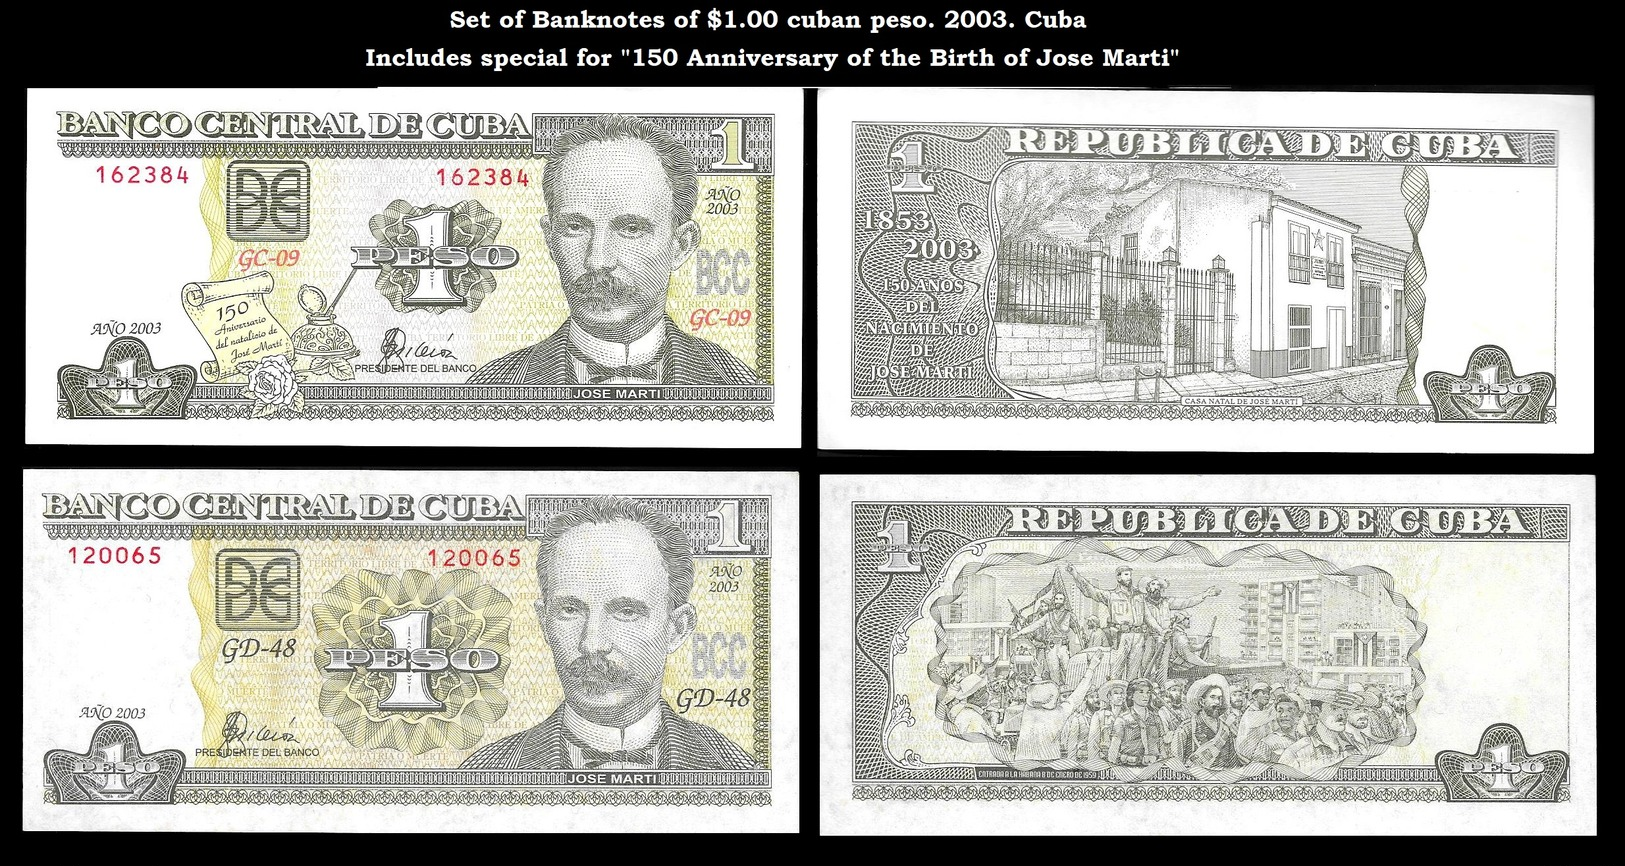 CUBA. Cuban Banknotes Of $1.00 Cuban Peso & Special Issue For 150th. Anniversary Of The Birth Of Jose Marti. 2003 - Cuba